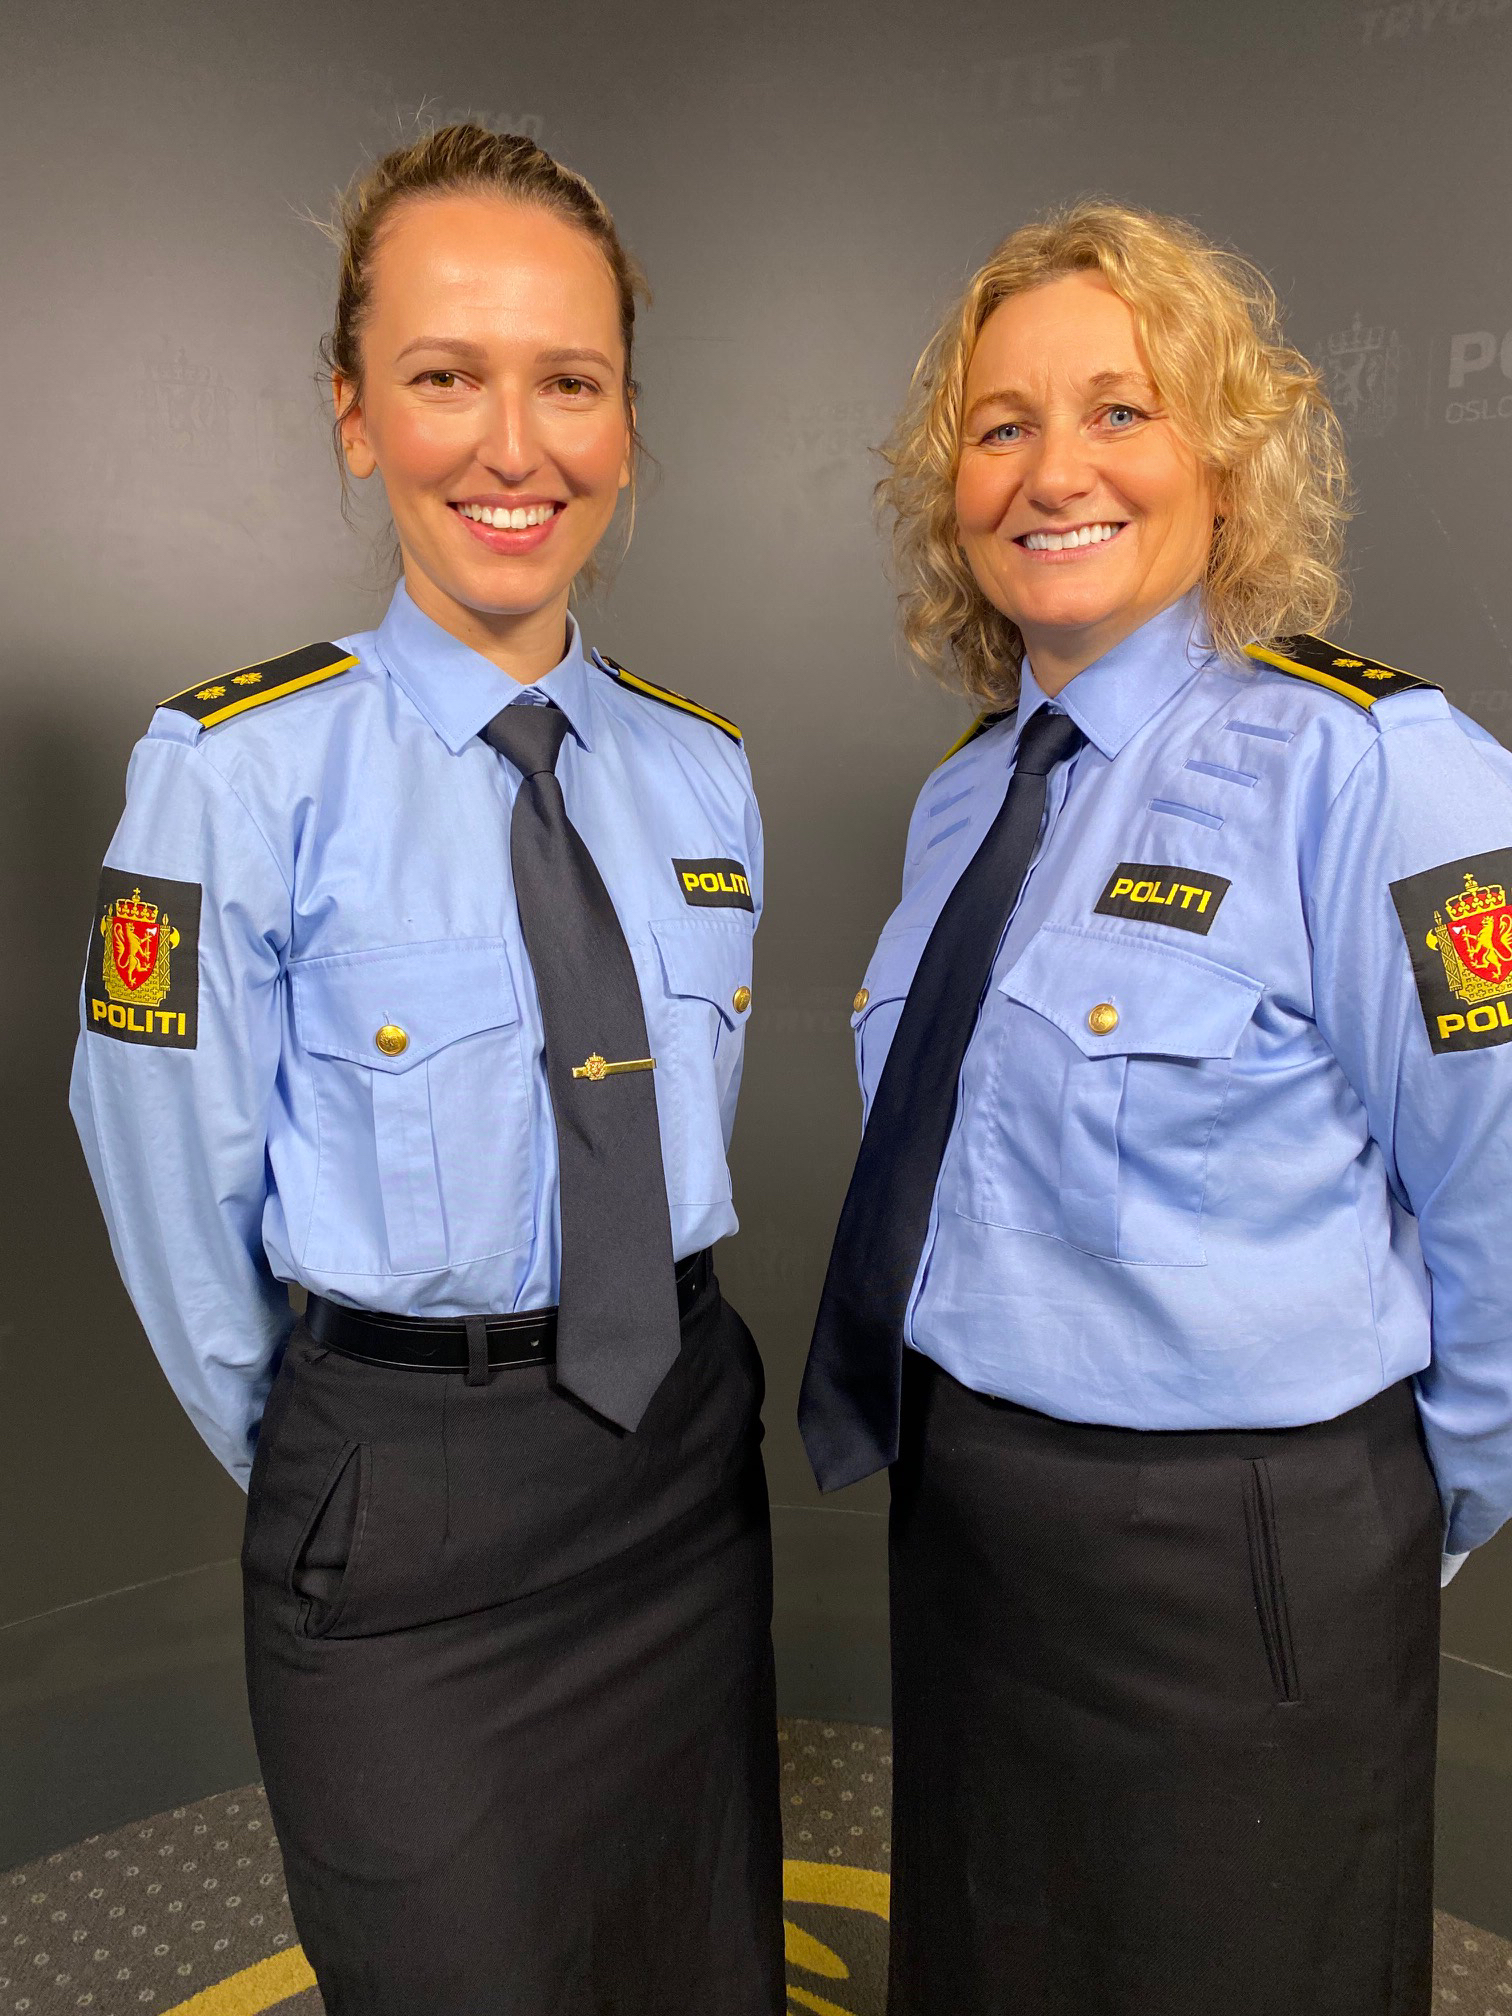 Abetare Krasniqi and Monica Lillebakken - police officers from Norway working with Romanian authorities